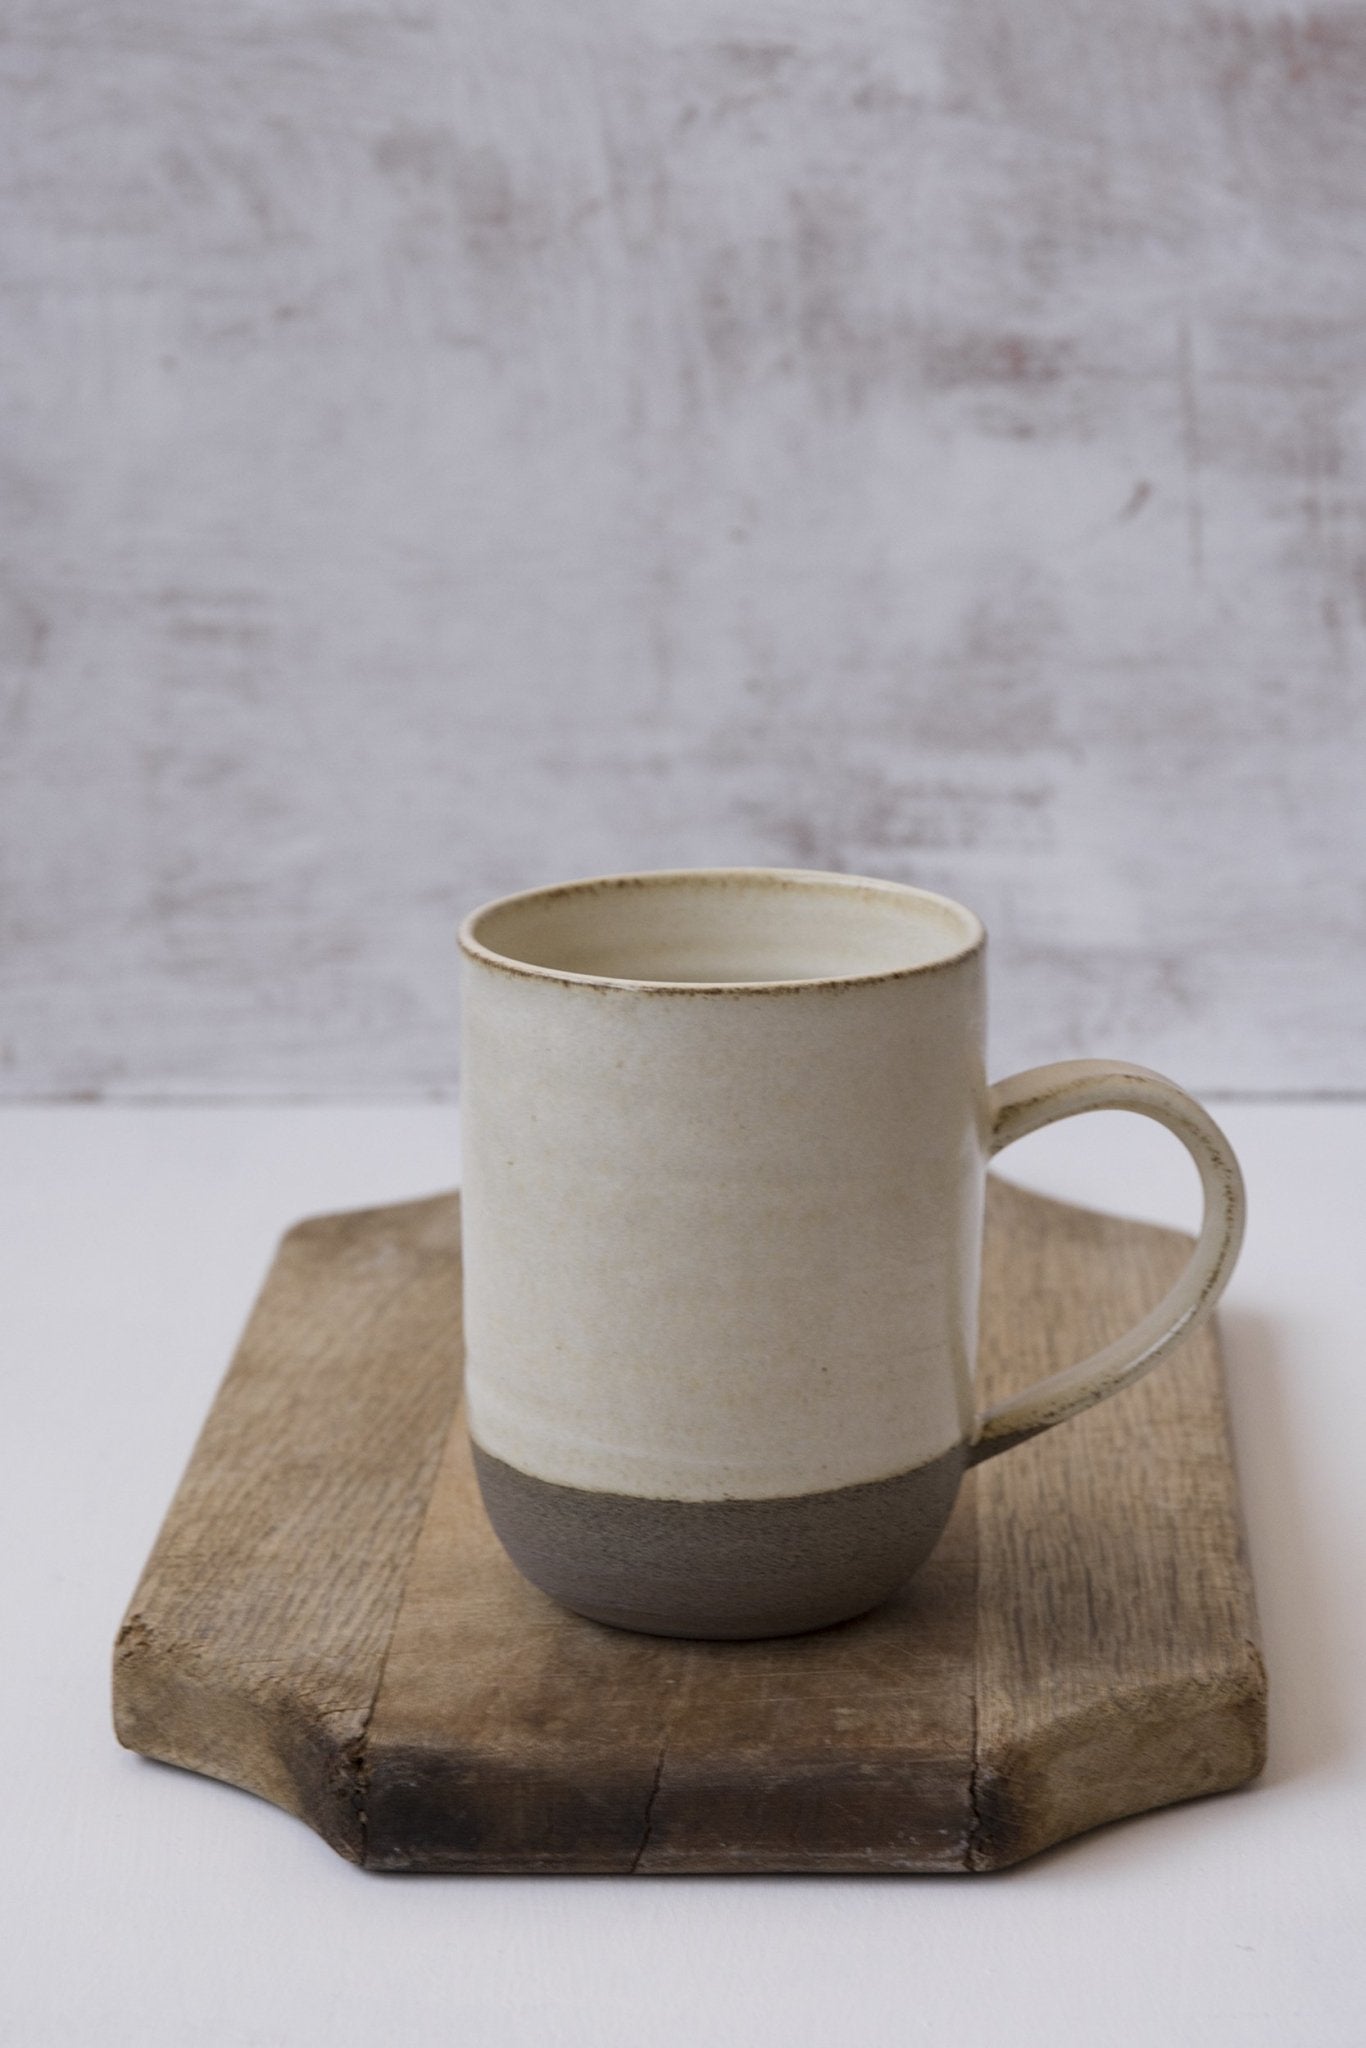 For Your Special Morning Coffee Ritual, Tall Narrow Pottery Mug, 10 fl oz